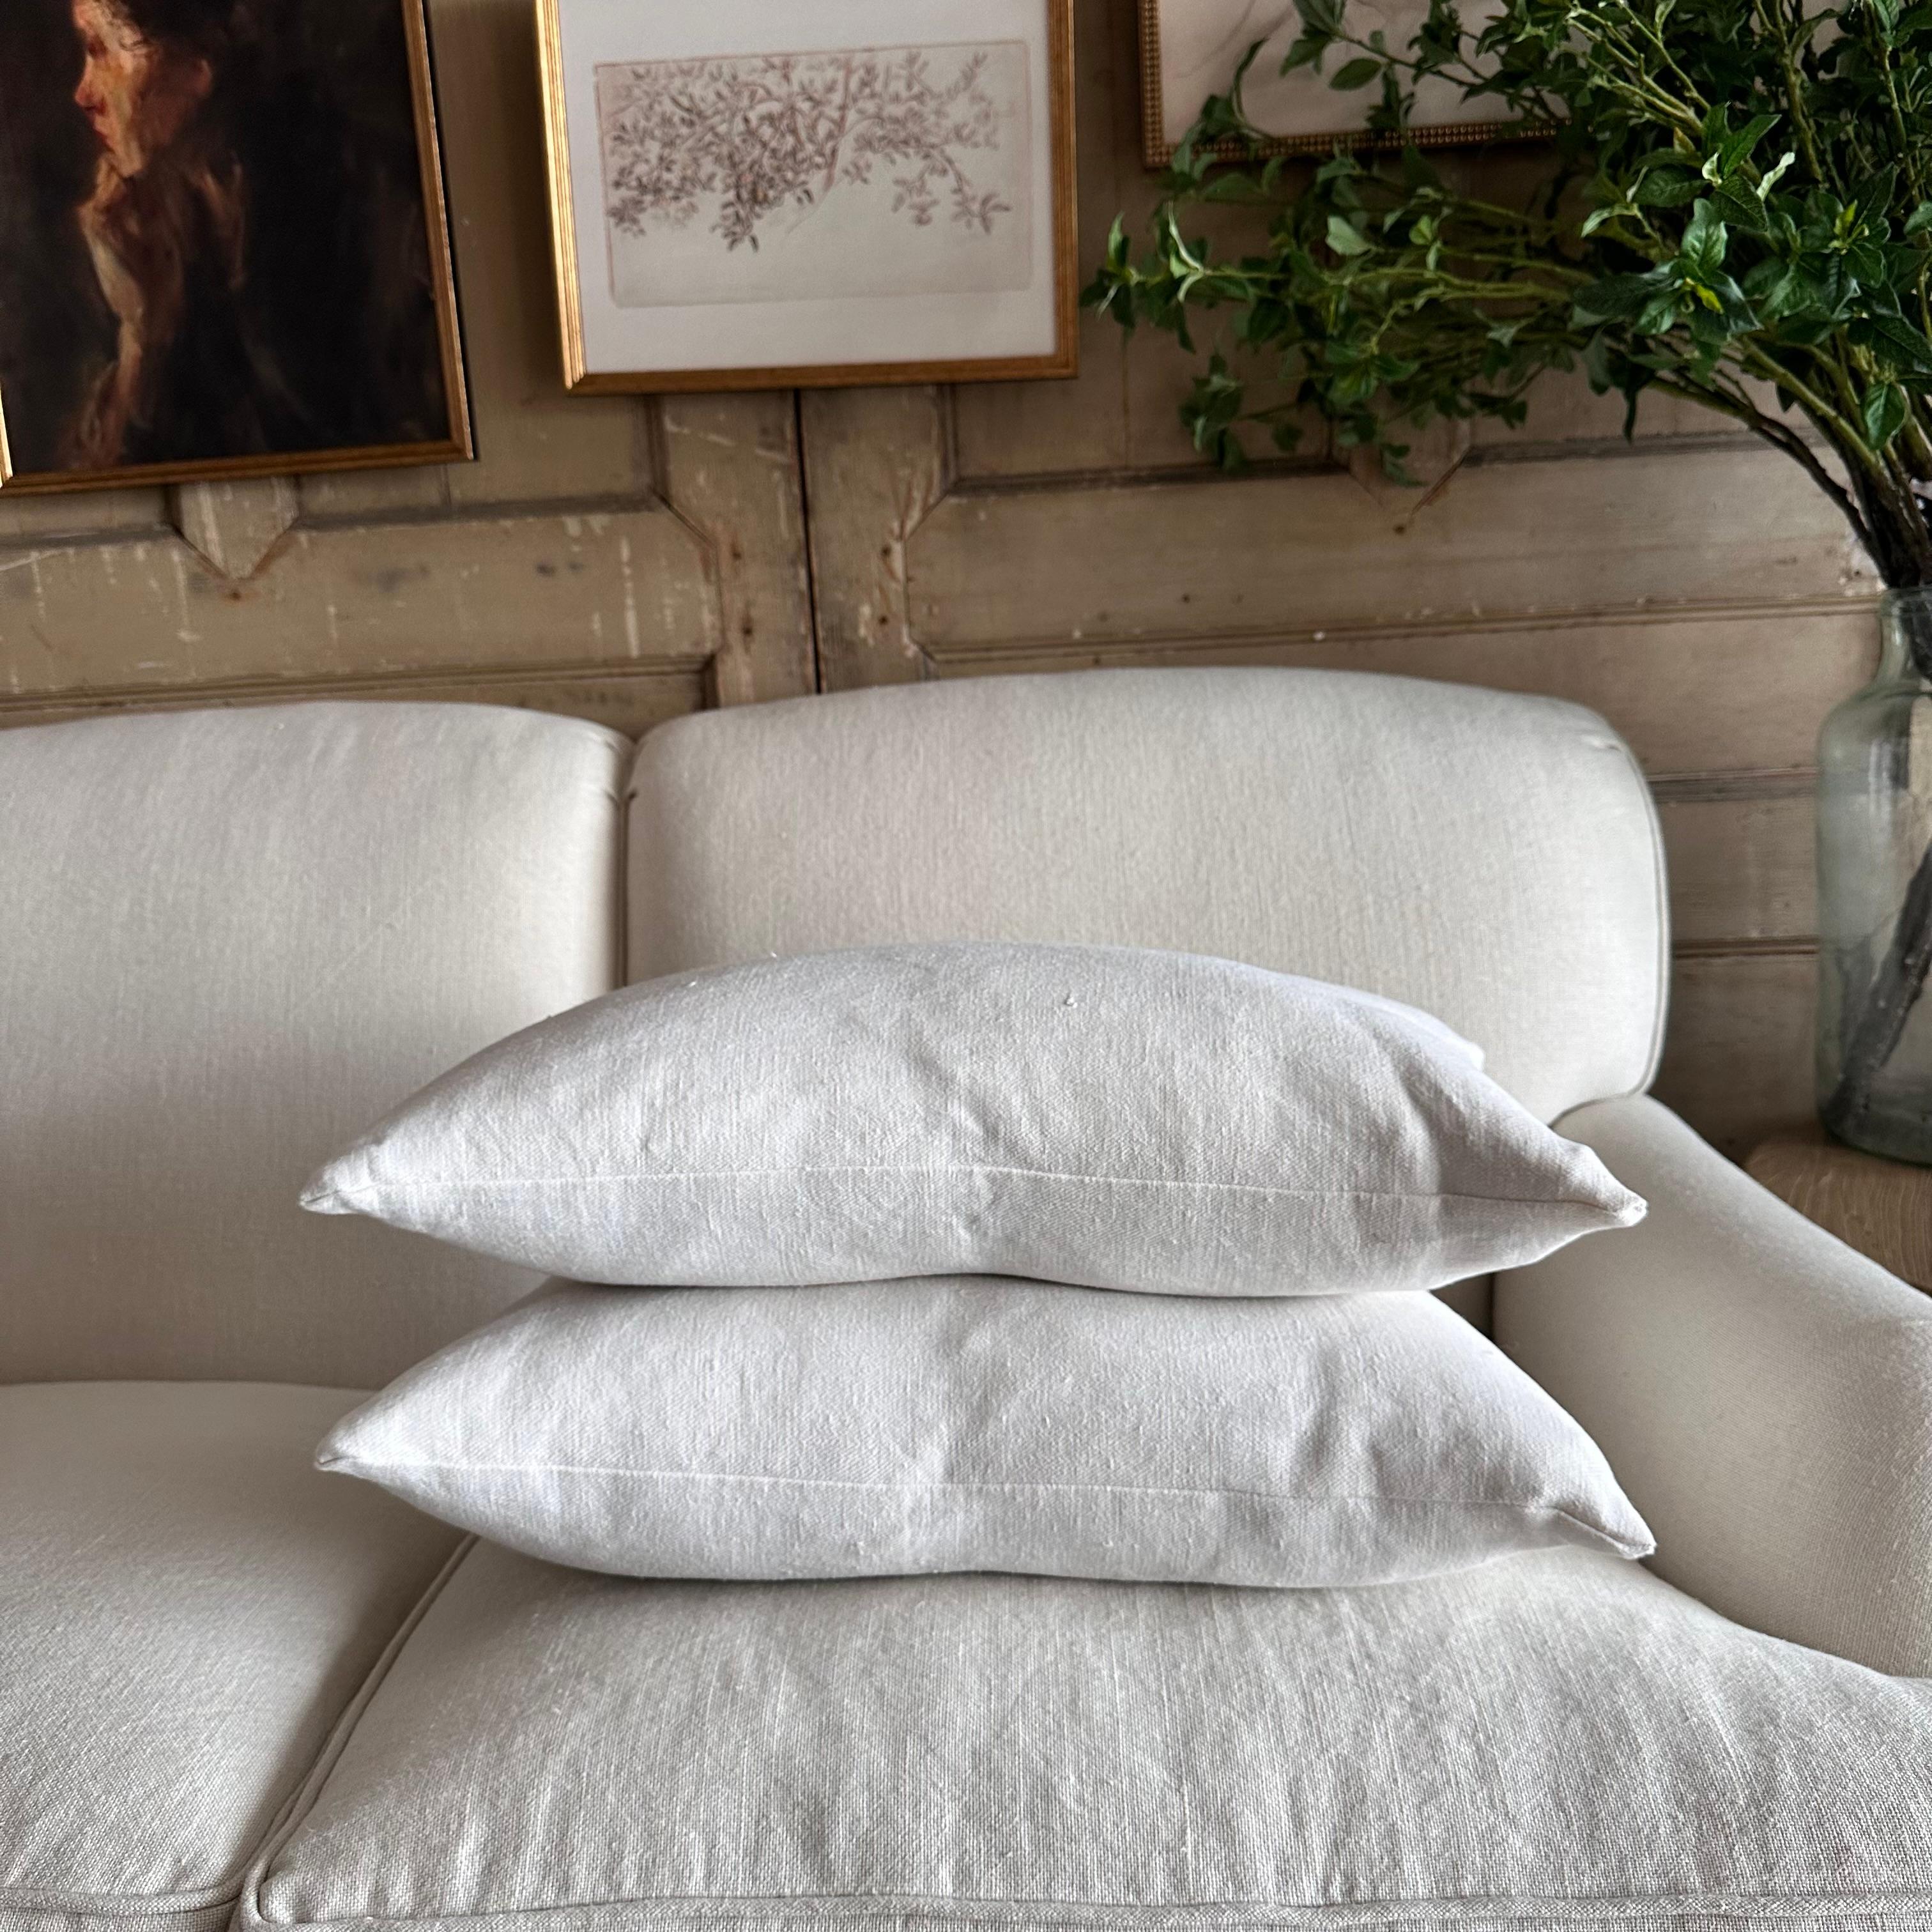 Antique French White Grain Linen Pillow with Insert For Sale 3